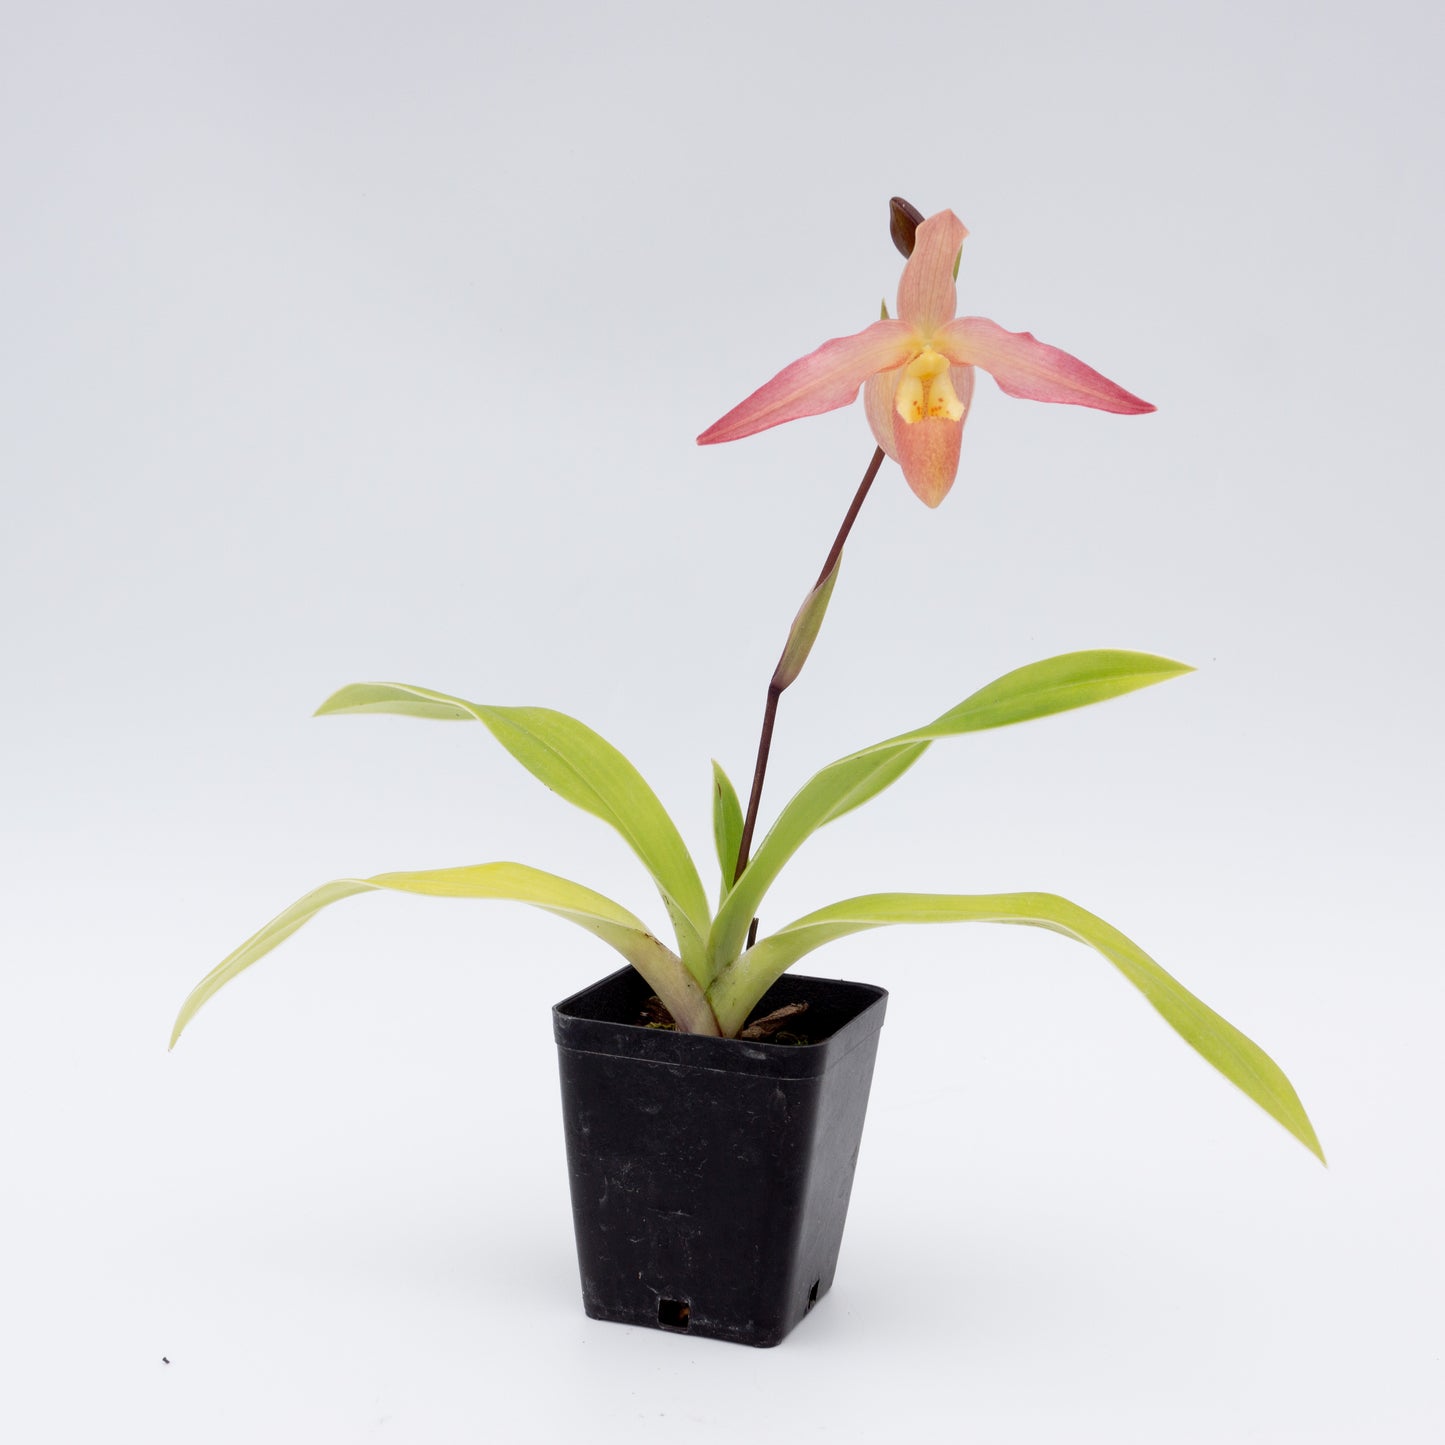 Salmon or peach pink and yellow Phragmipedium flower potted orchid plant Hawaii